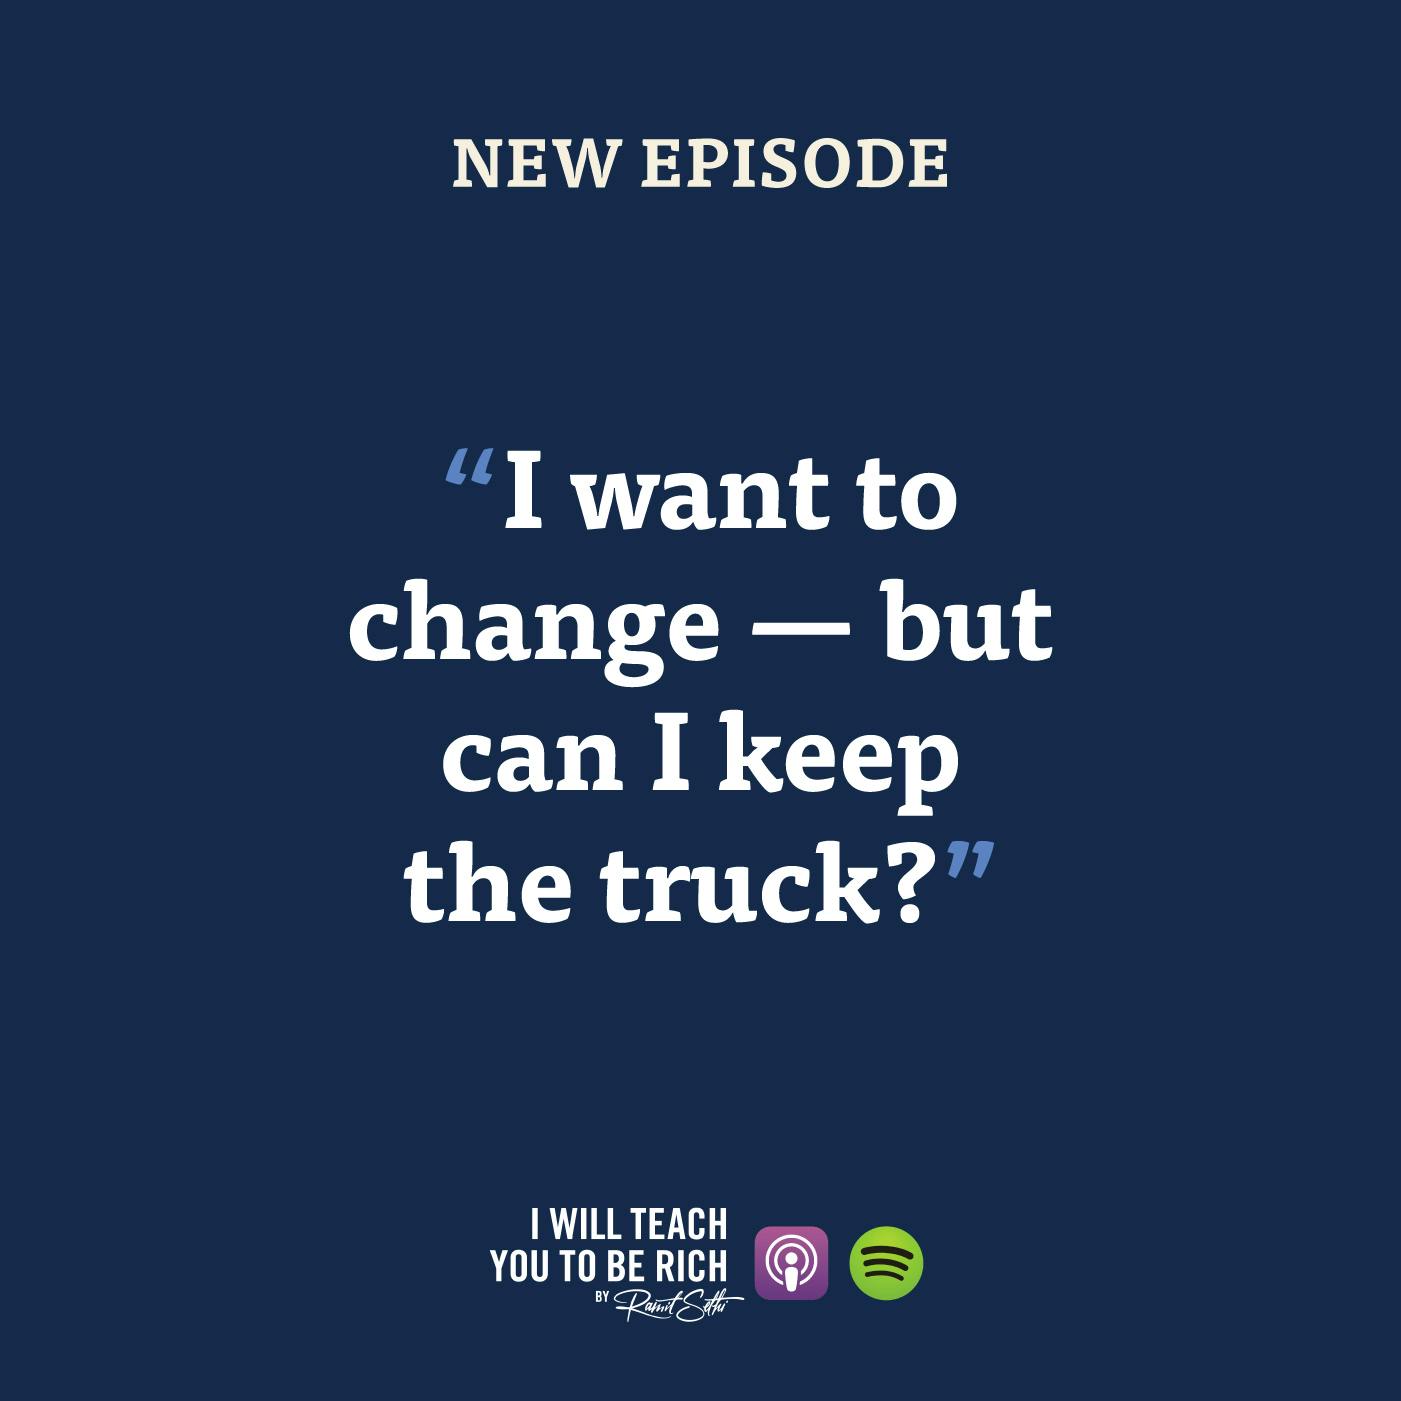 30. “I want to change—but can I keep the truck?”